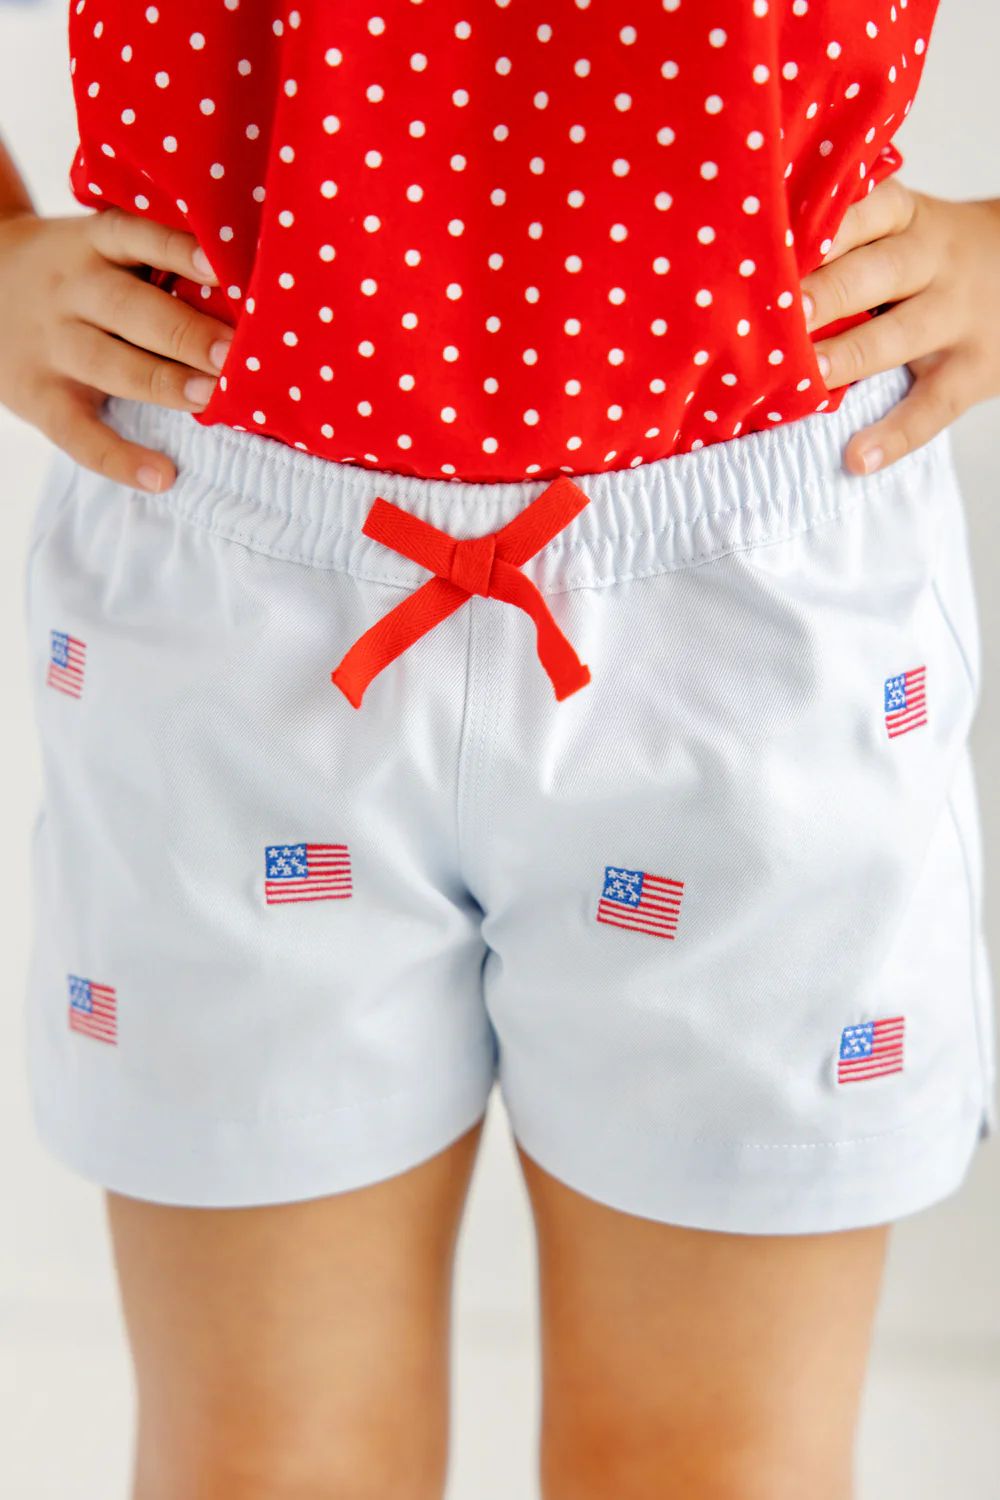 Critter Cheryl Shorts - Buckhead Blue & American Flag Embroidery with Richmond Red Bow | The Beaufort Bonnet Company